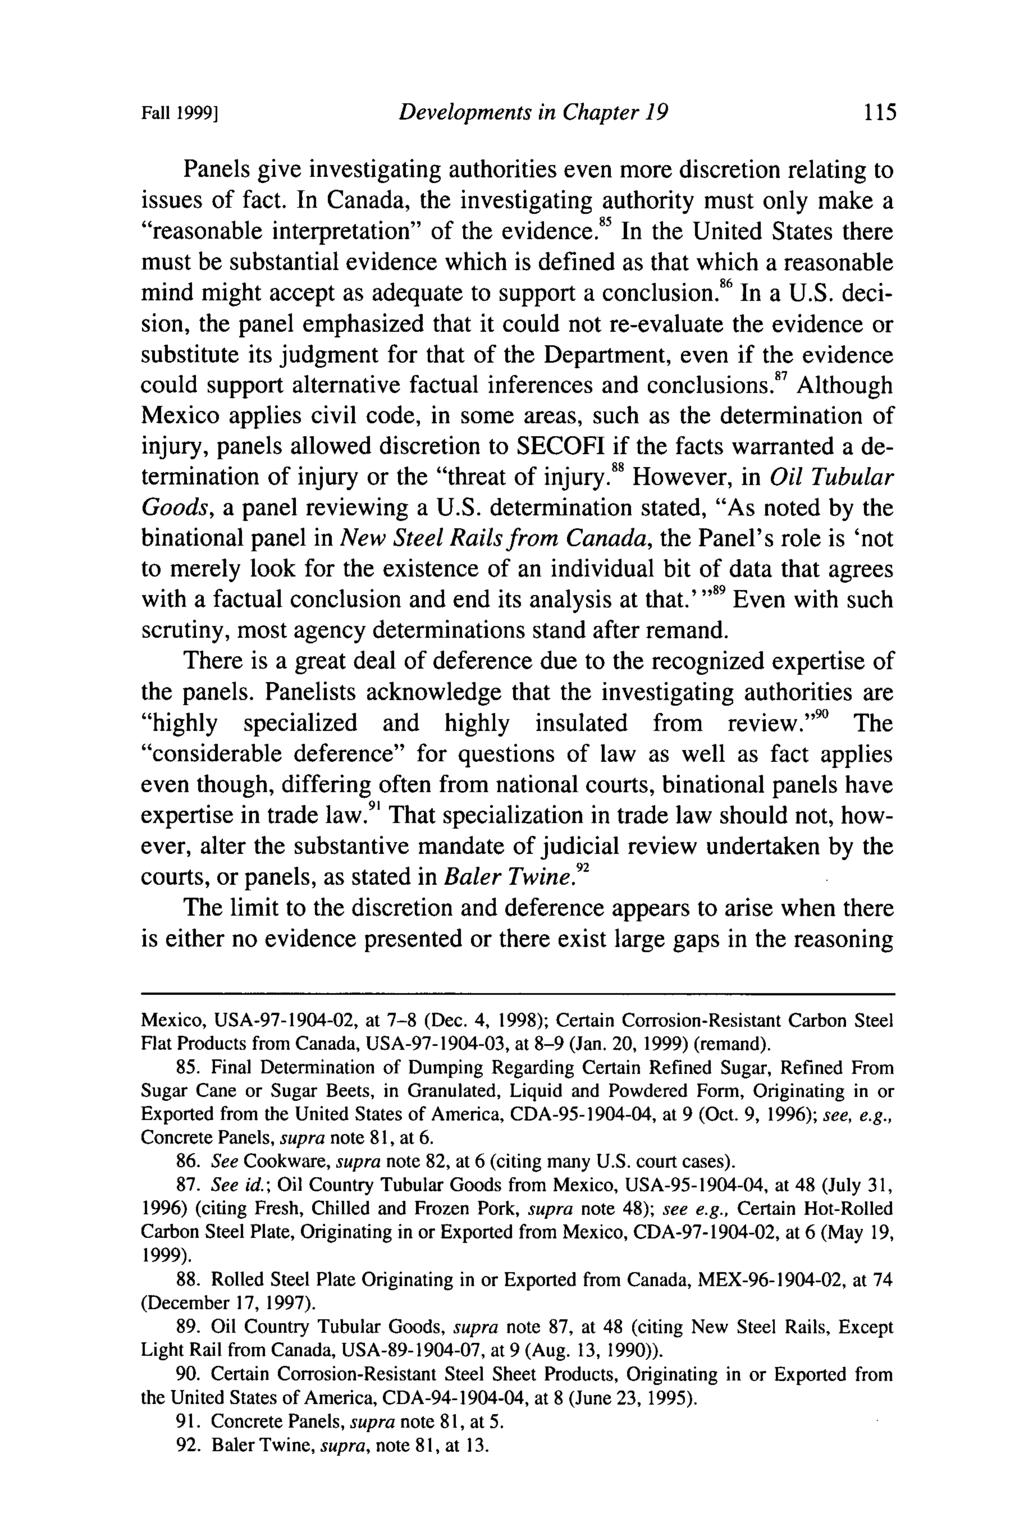 Fall 1999] Developments in Chapter 19 Panels give investigating authorities even more discretion relating to issues of fact.